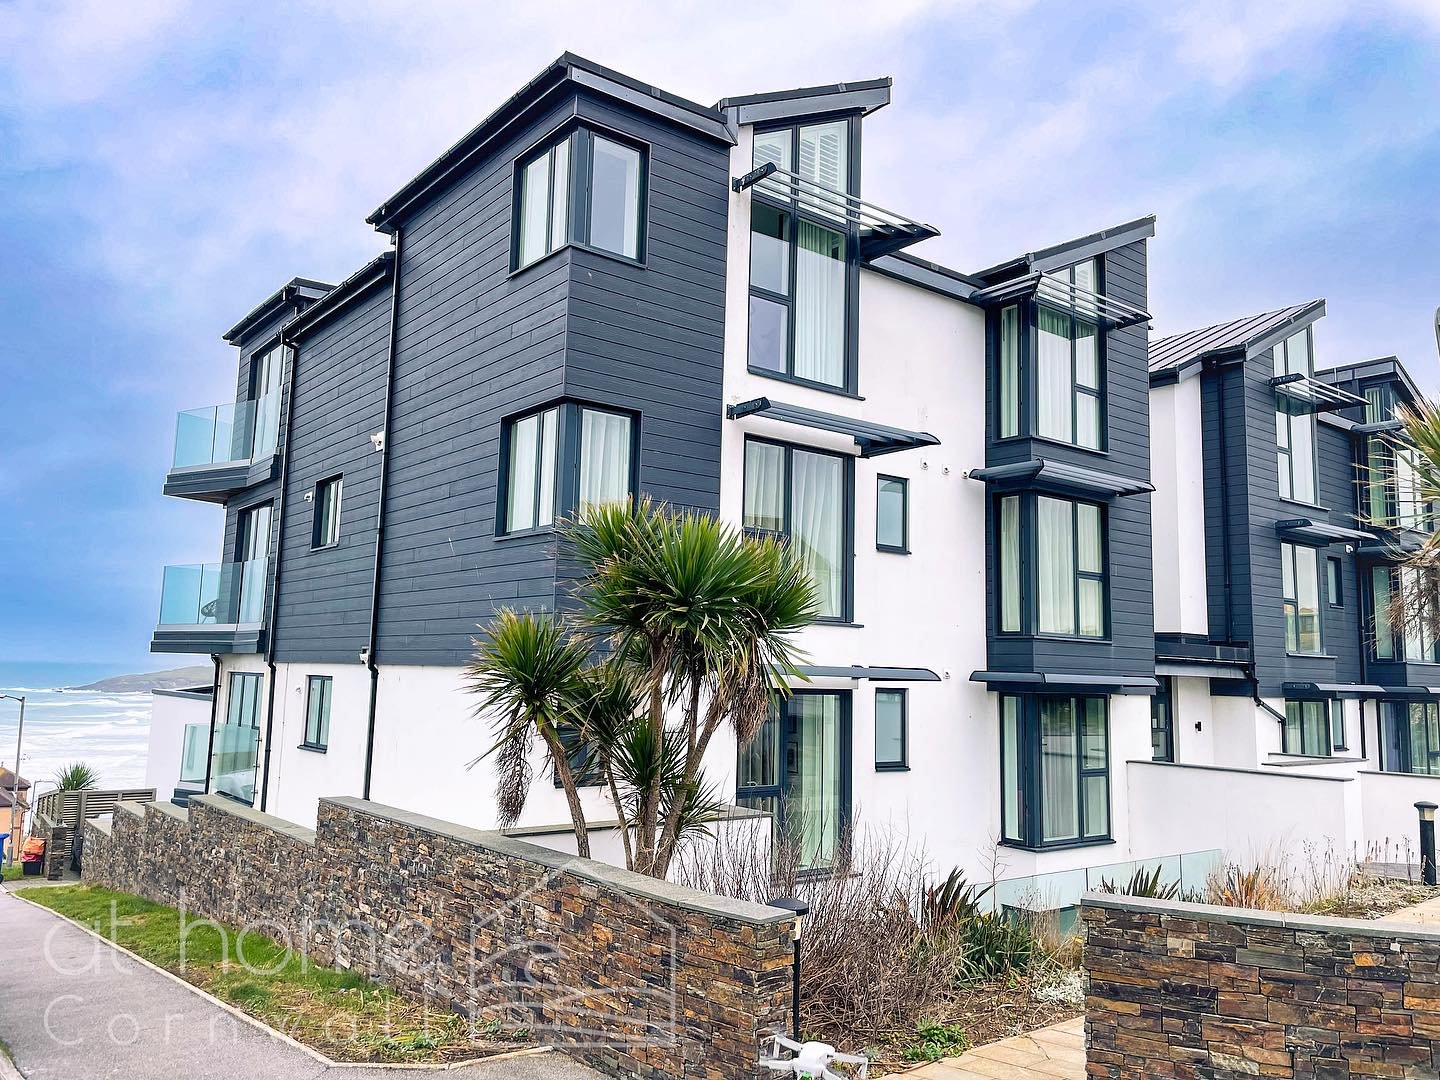 EXCHANGED &amp; COMPLETED 🥂🍾

Pentire, Newquay 

We are delighted to report that we have completed on this stunning 2-bedroom ground floor apartment that offers not just a home, but a lifestyle. 
With it&rsquo;s prime location, off-road parking, an